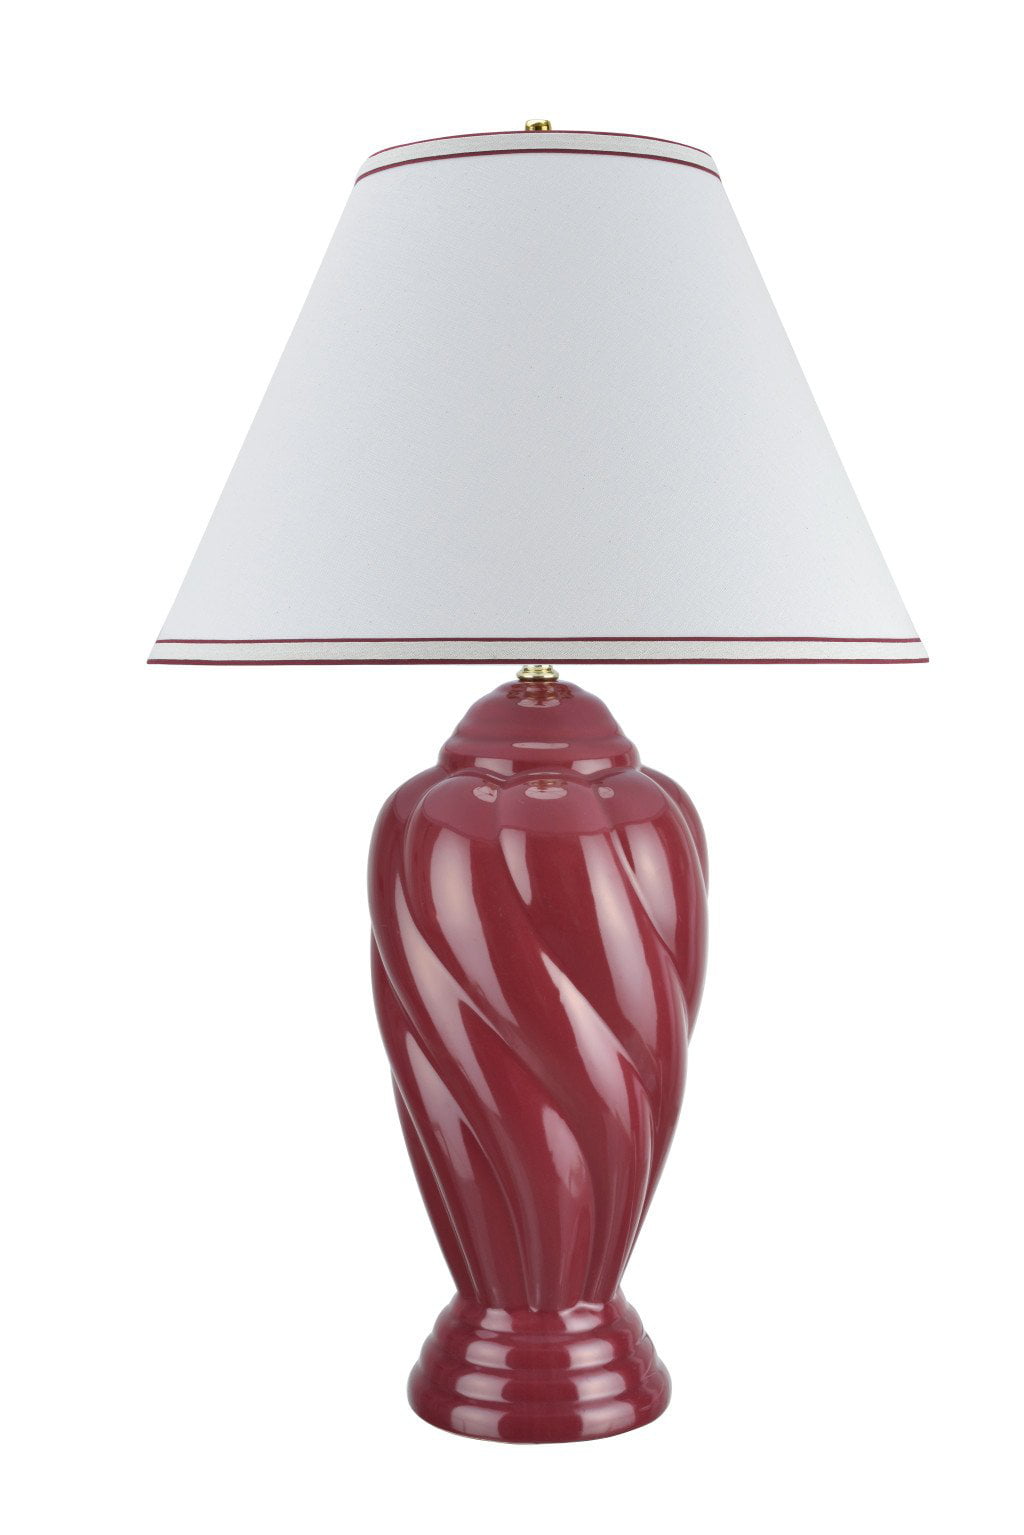 Burgundy with Pewter Finish Base and Hardback Empire Shaped Lamp Shade in Off White 15 Wide Aspen Creative 40093-4 26 High Traditional Ceramic Table